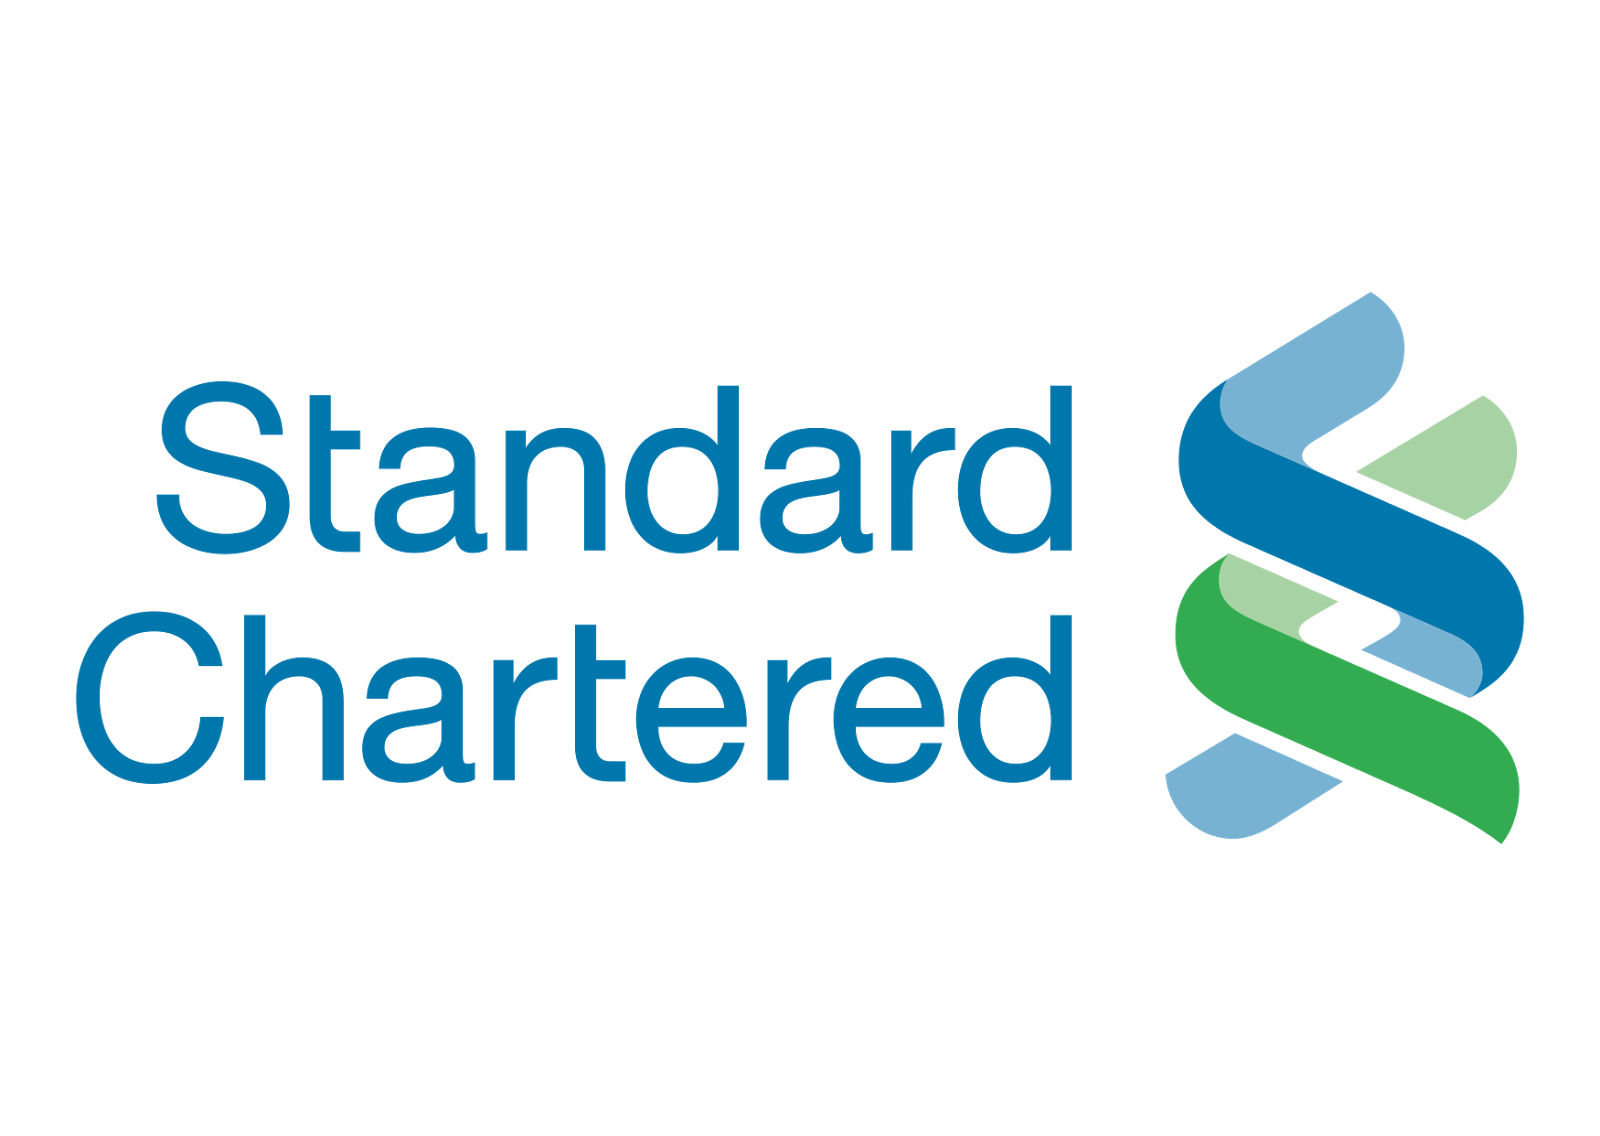 Standard Charted Bank